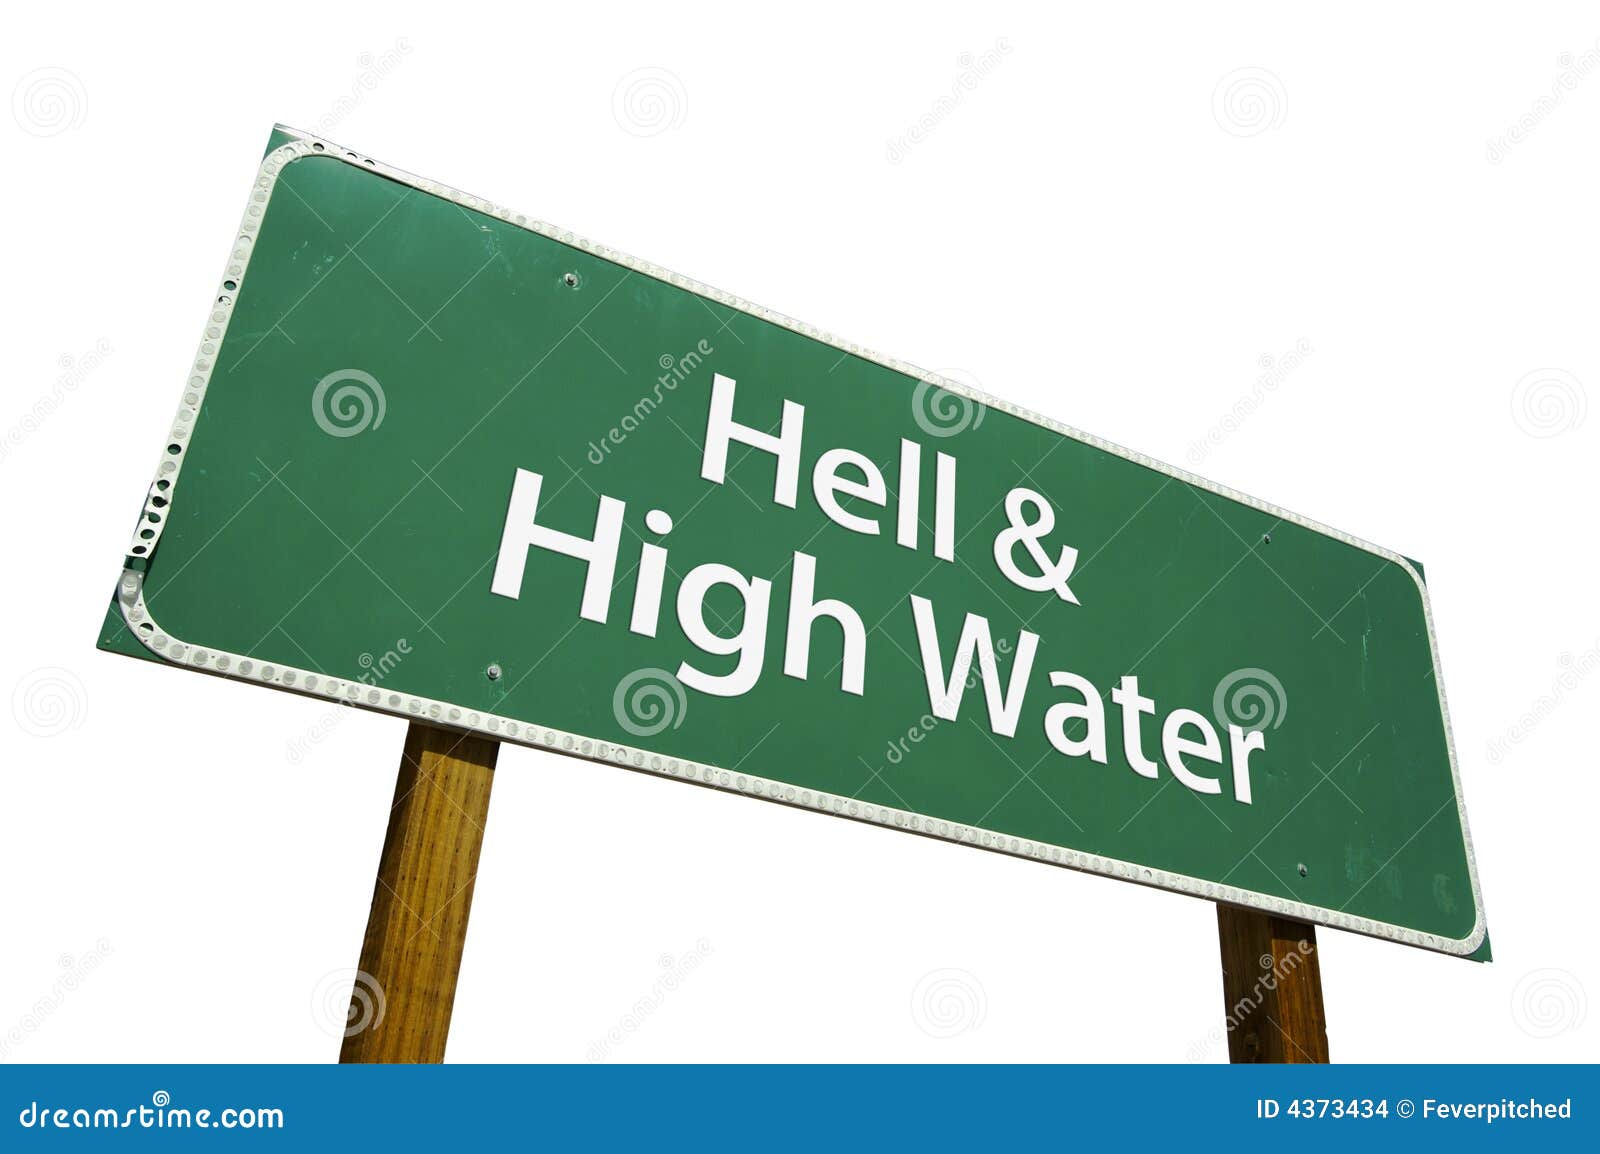 hell & high water road sign